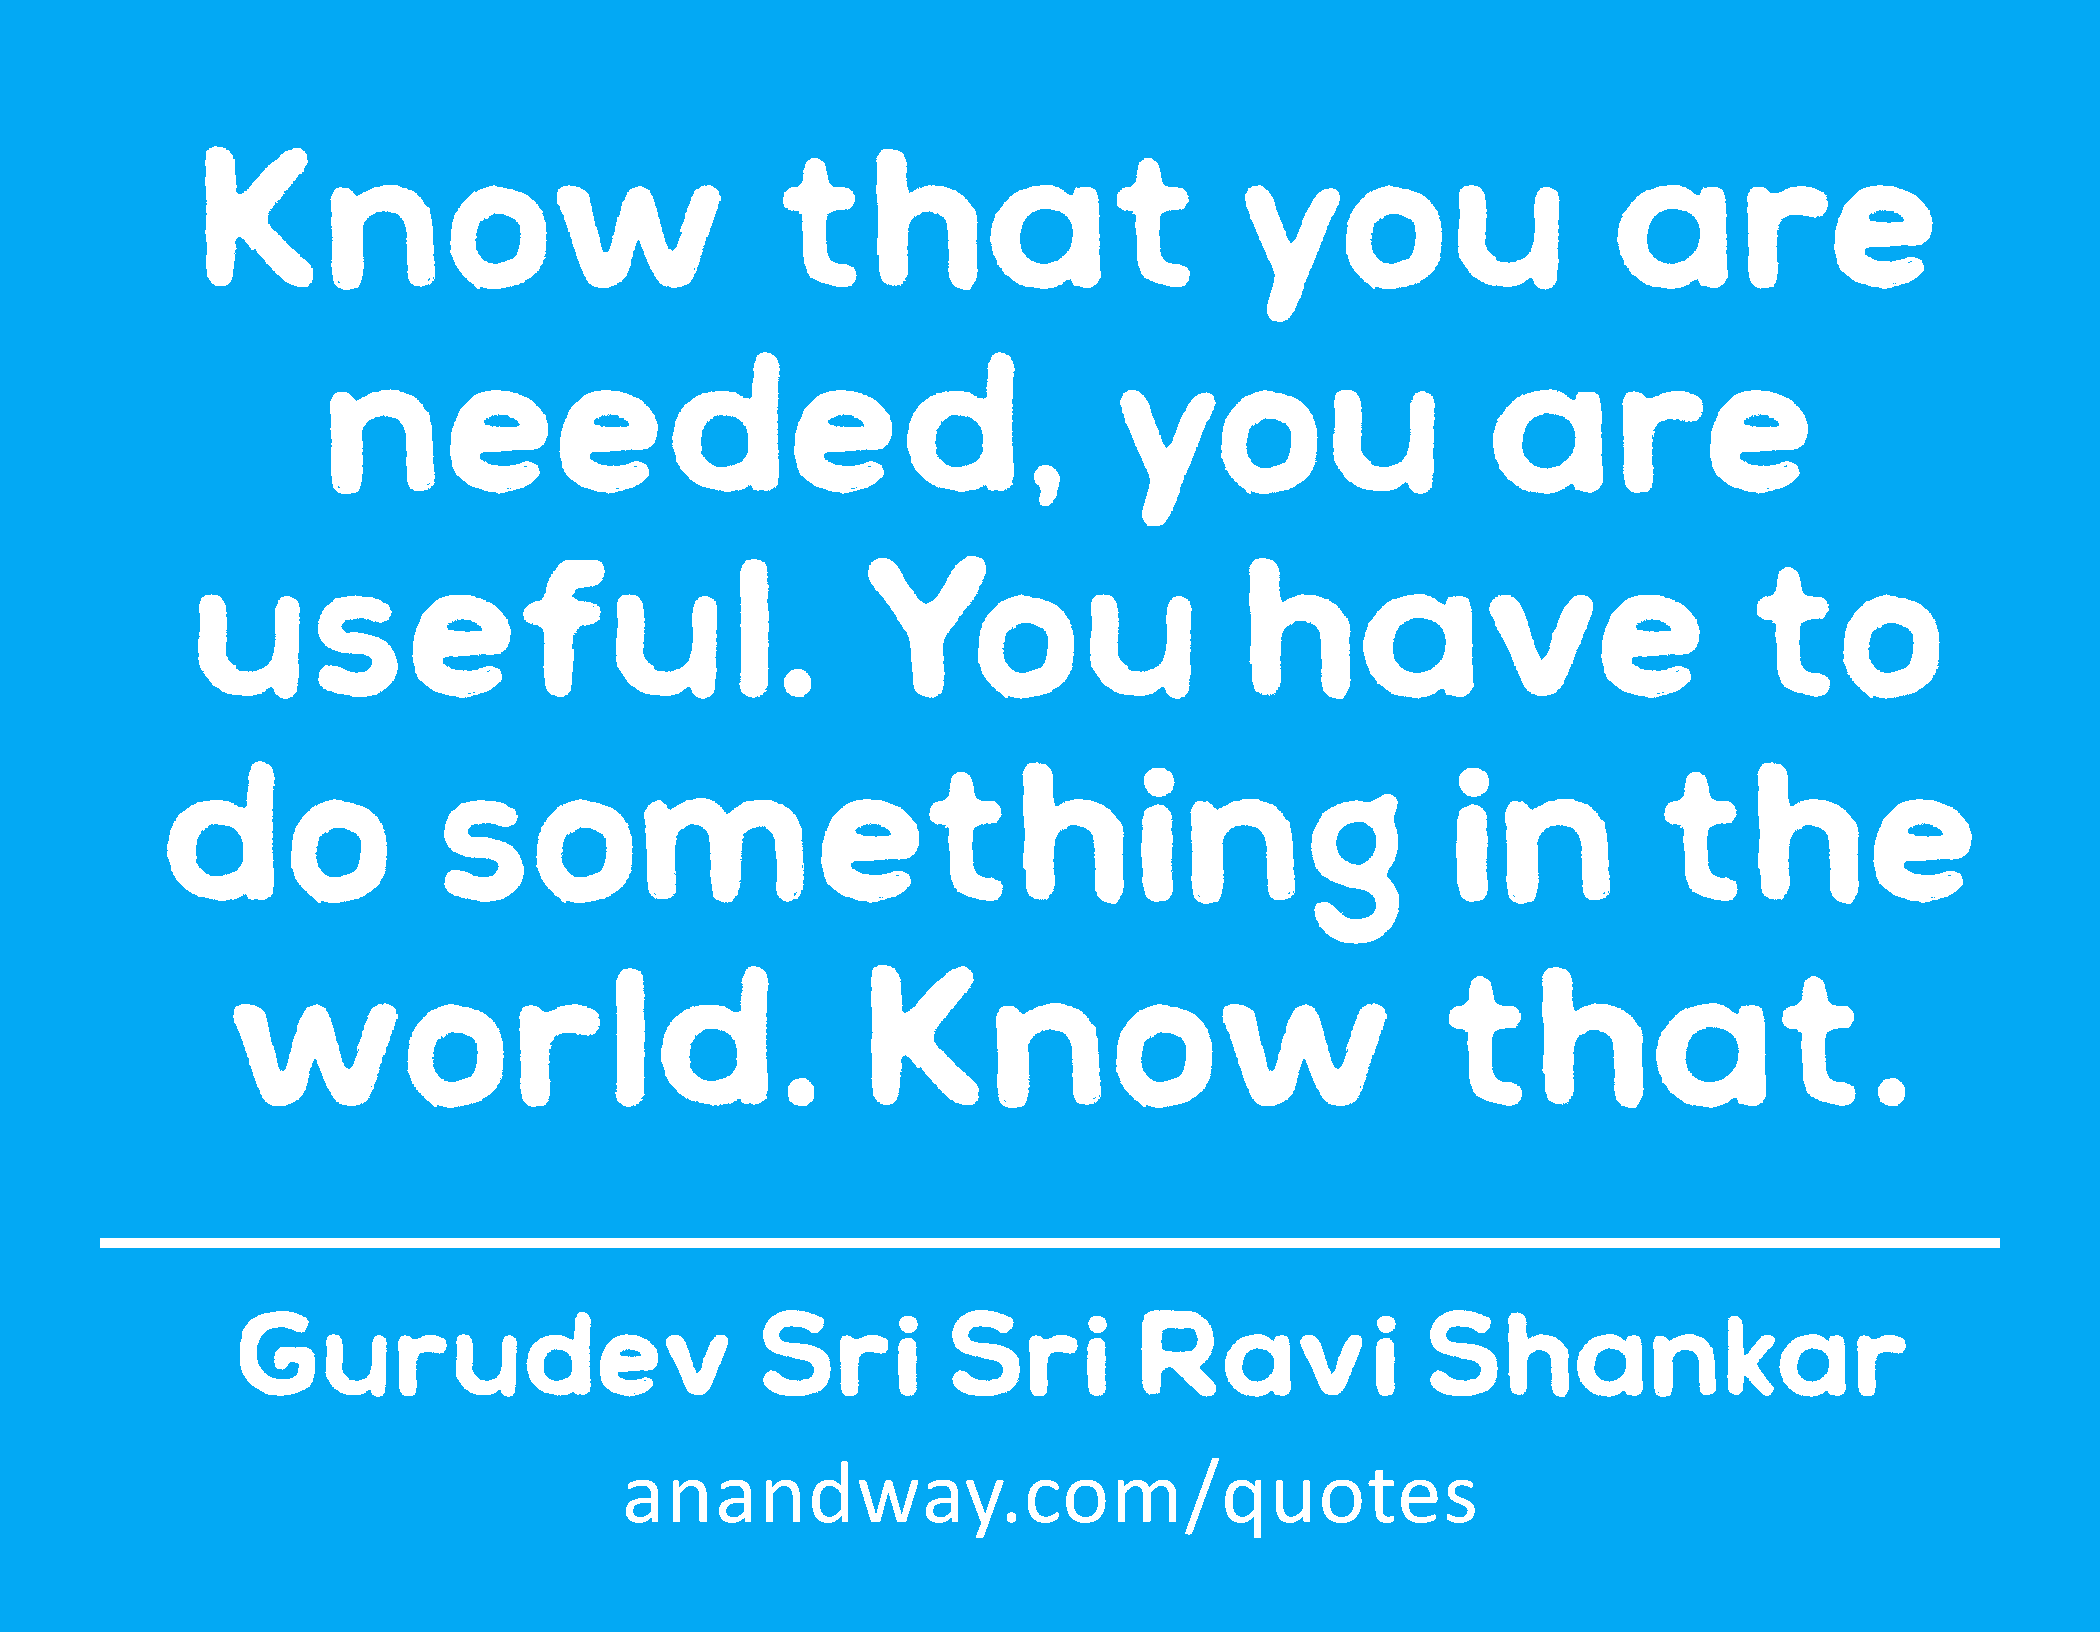 Know that you are needed, you are useful. You have to do something in the world. Know that. 
 -Gurudev Sri Sri Ravi Shankar